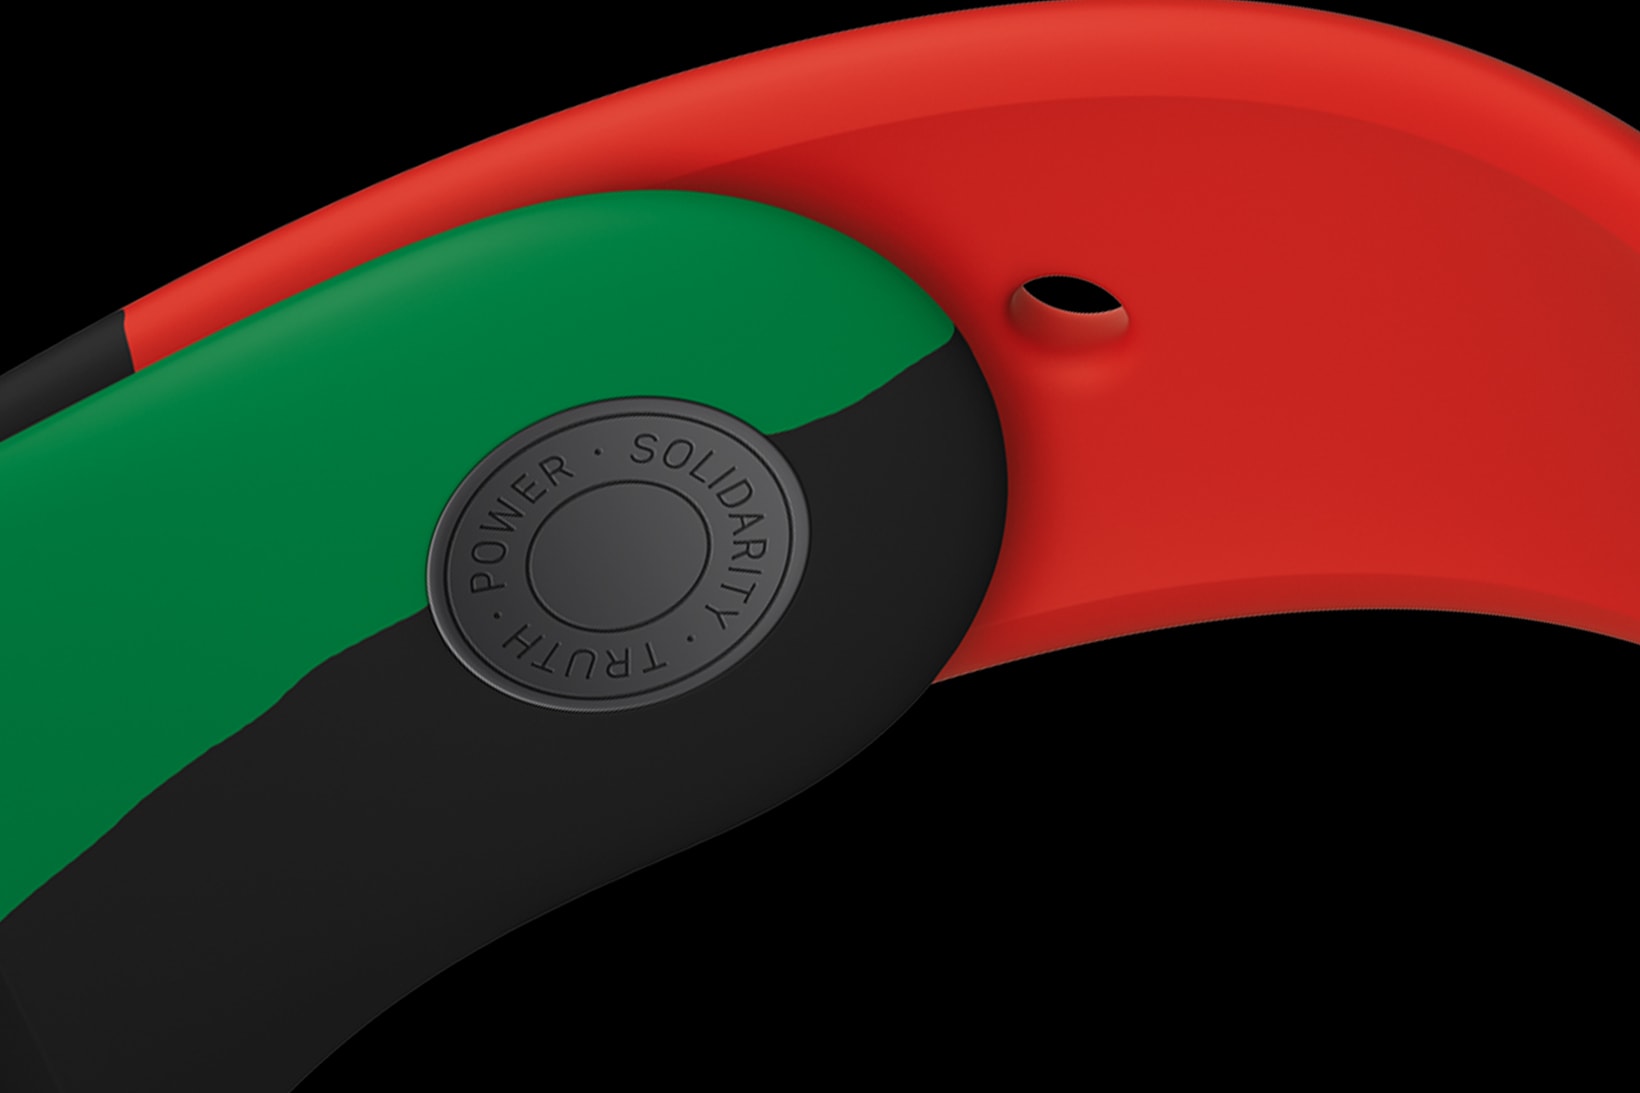 apple black history month unity collection watch series 6 sport band green red